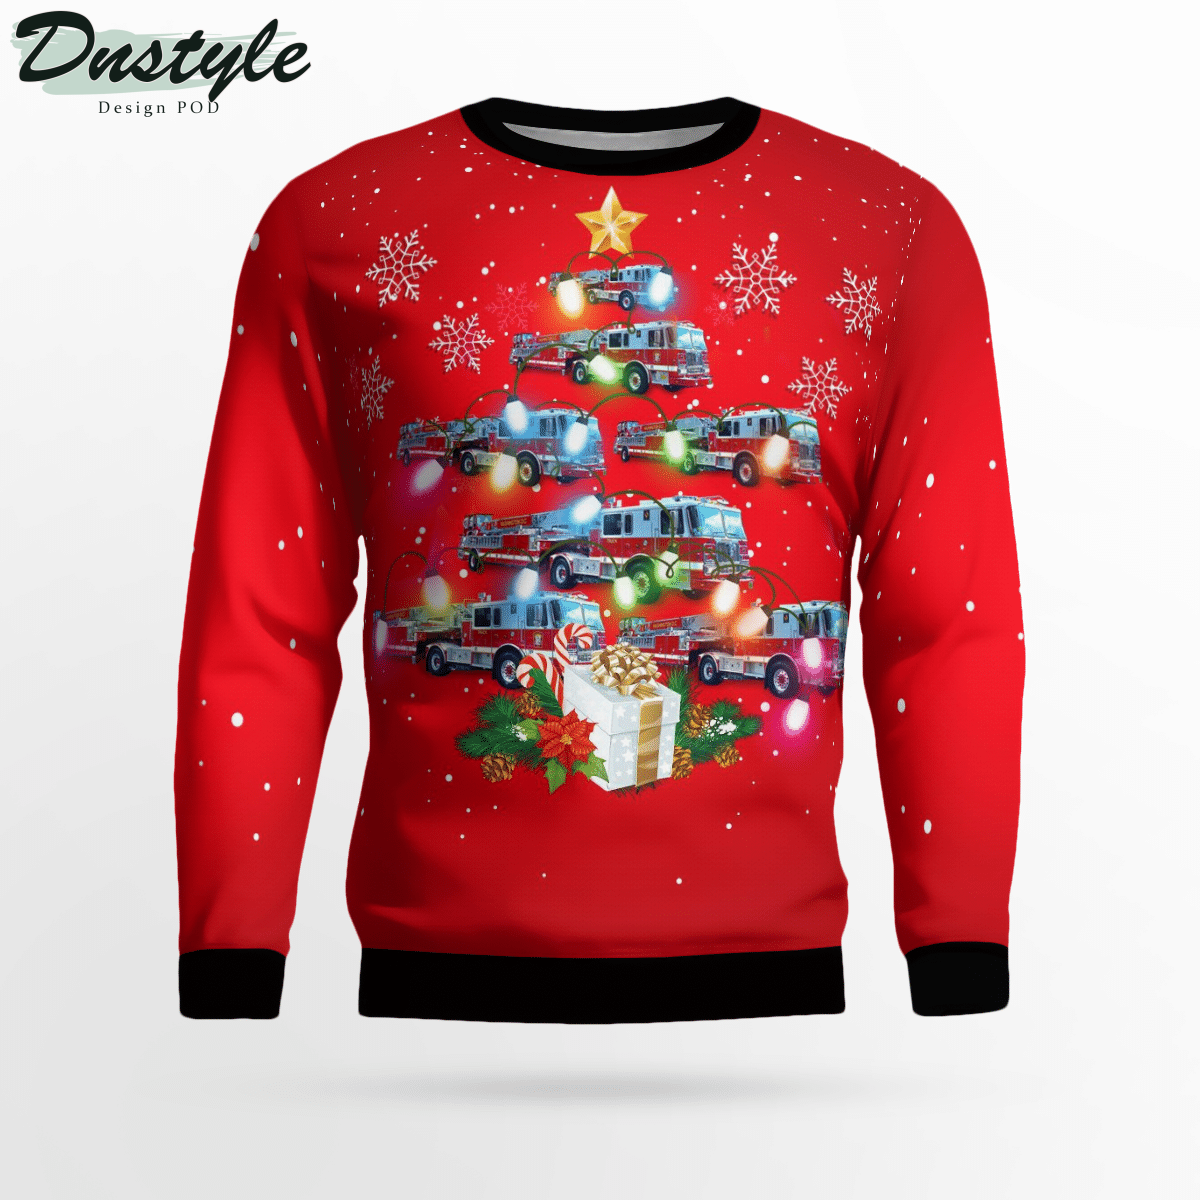 Washington DC Fire And EMS Red Ugly Christmas Sweater